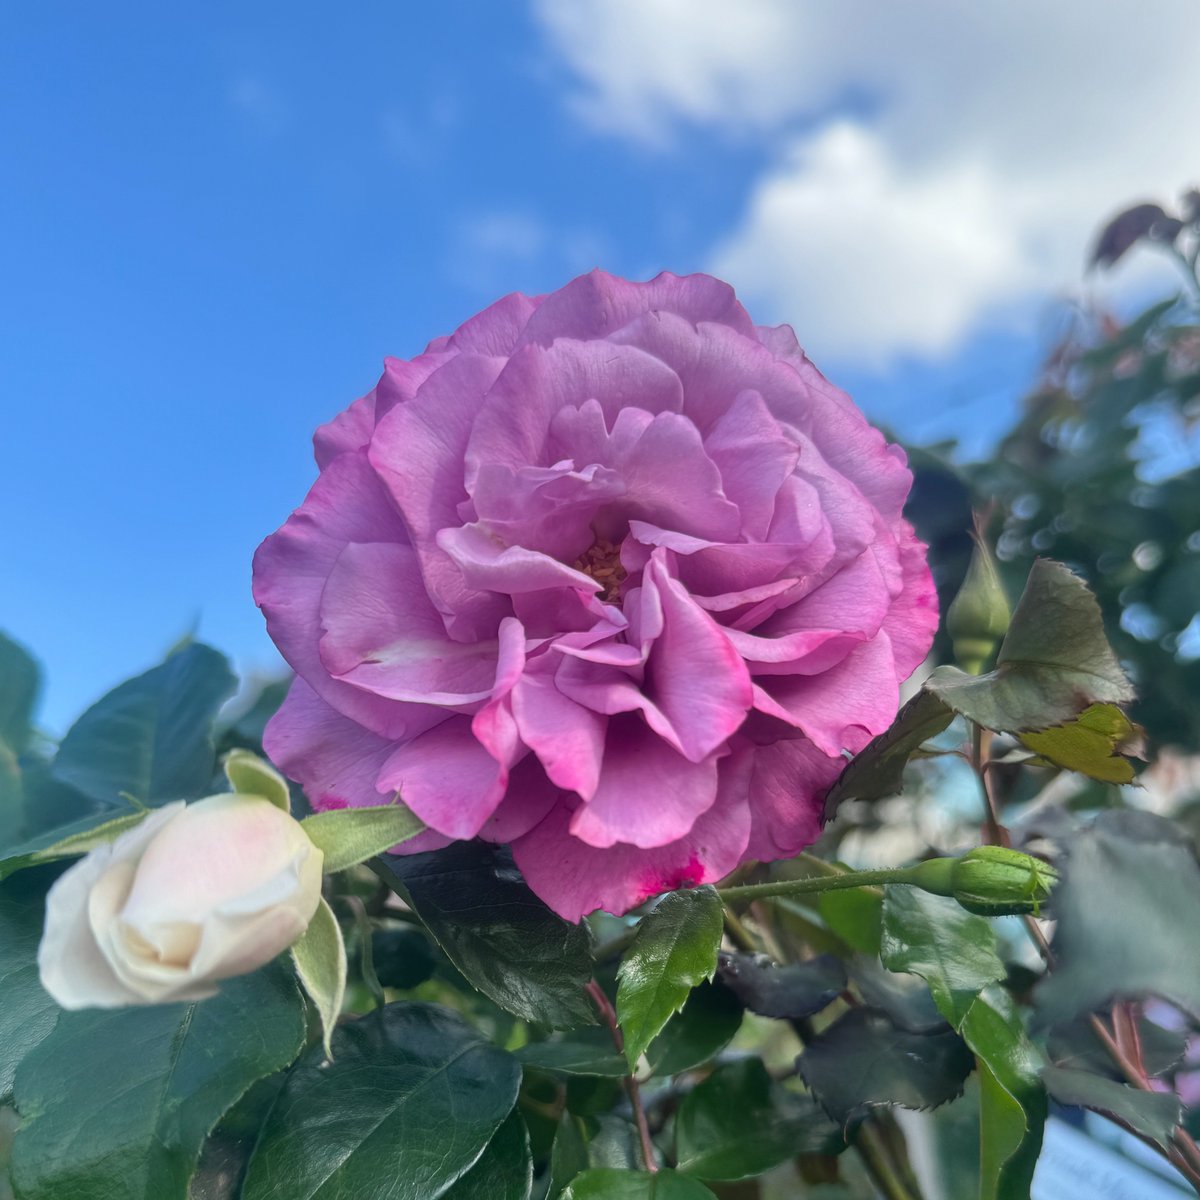 Grab your 2ft Standard (Bare Rooted) Roses for just $14.99! Don't miss out on this fantastic deal!🌹
Shop for roses HERE👇
 hubs.li/Q02sZBBr0  

#hellohelloplants #roses #flowers #plants #plantnursery #plantlover #gardeningtips #barerooted #beautifulplant